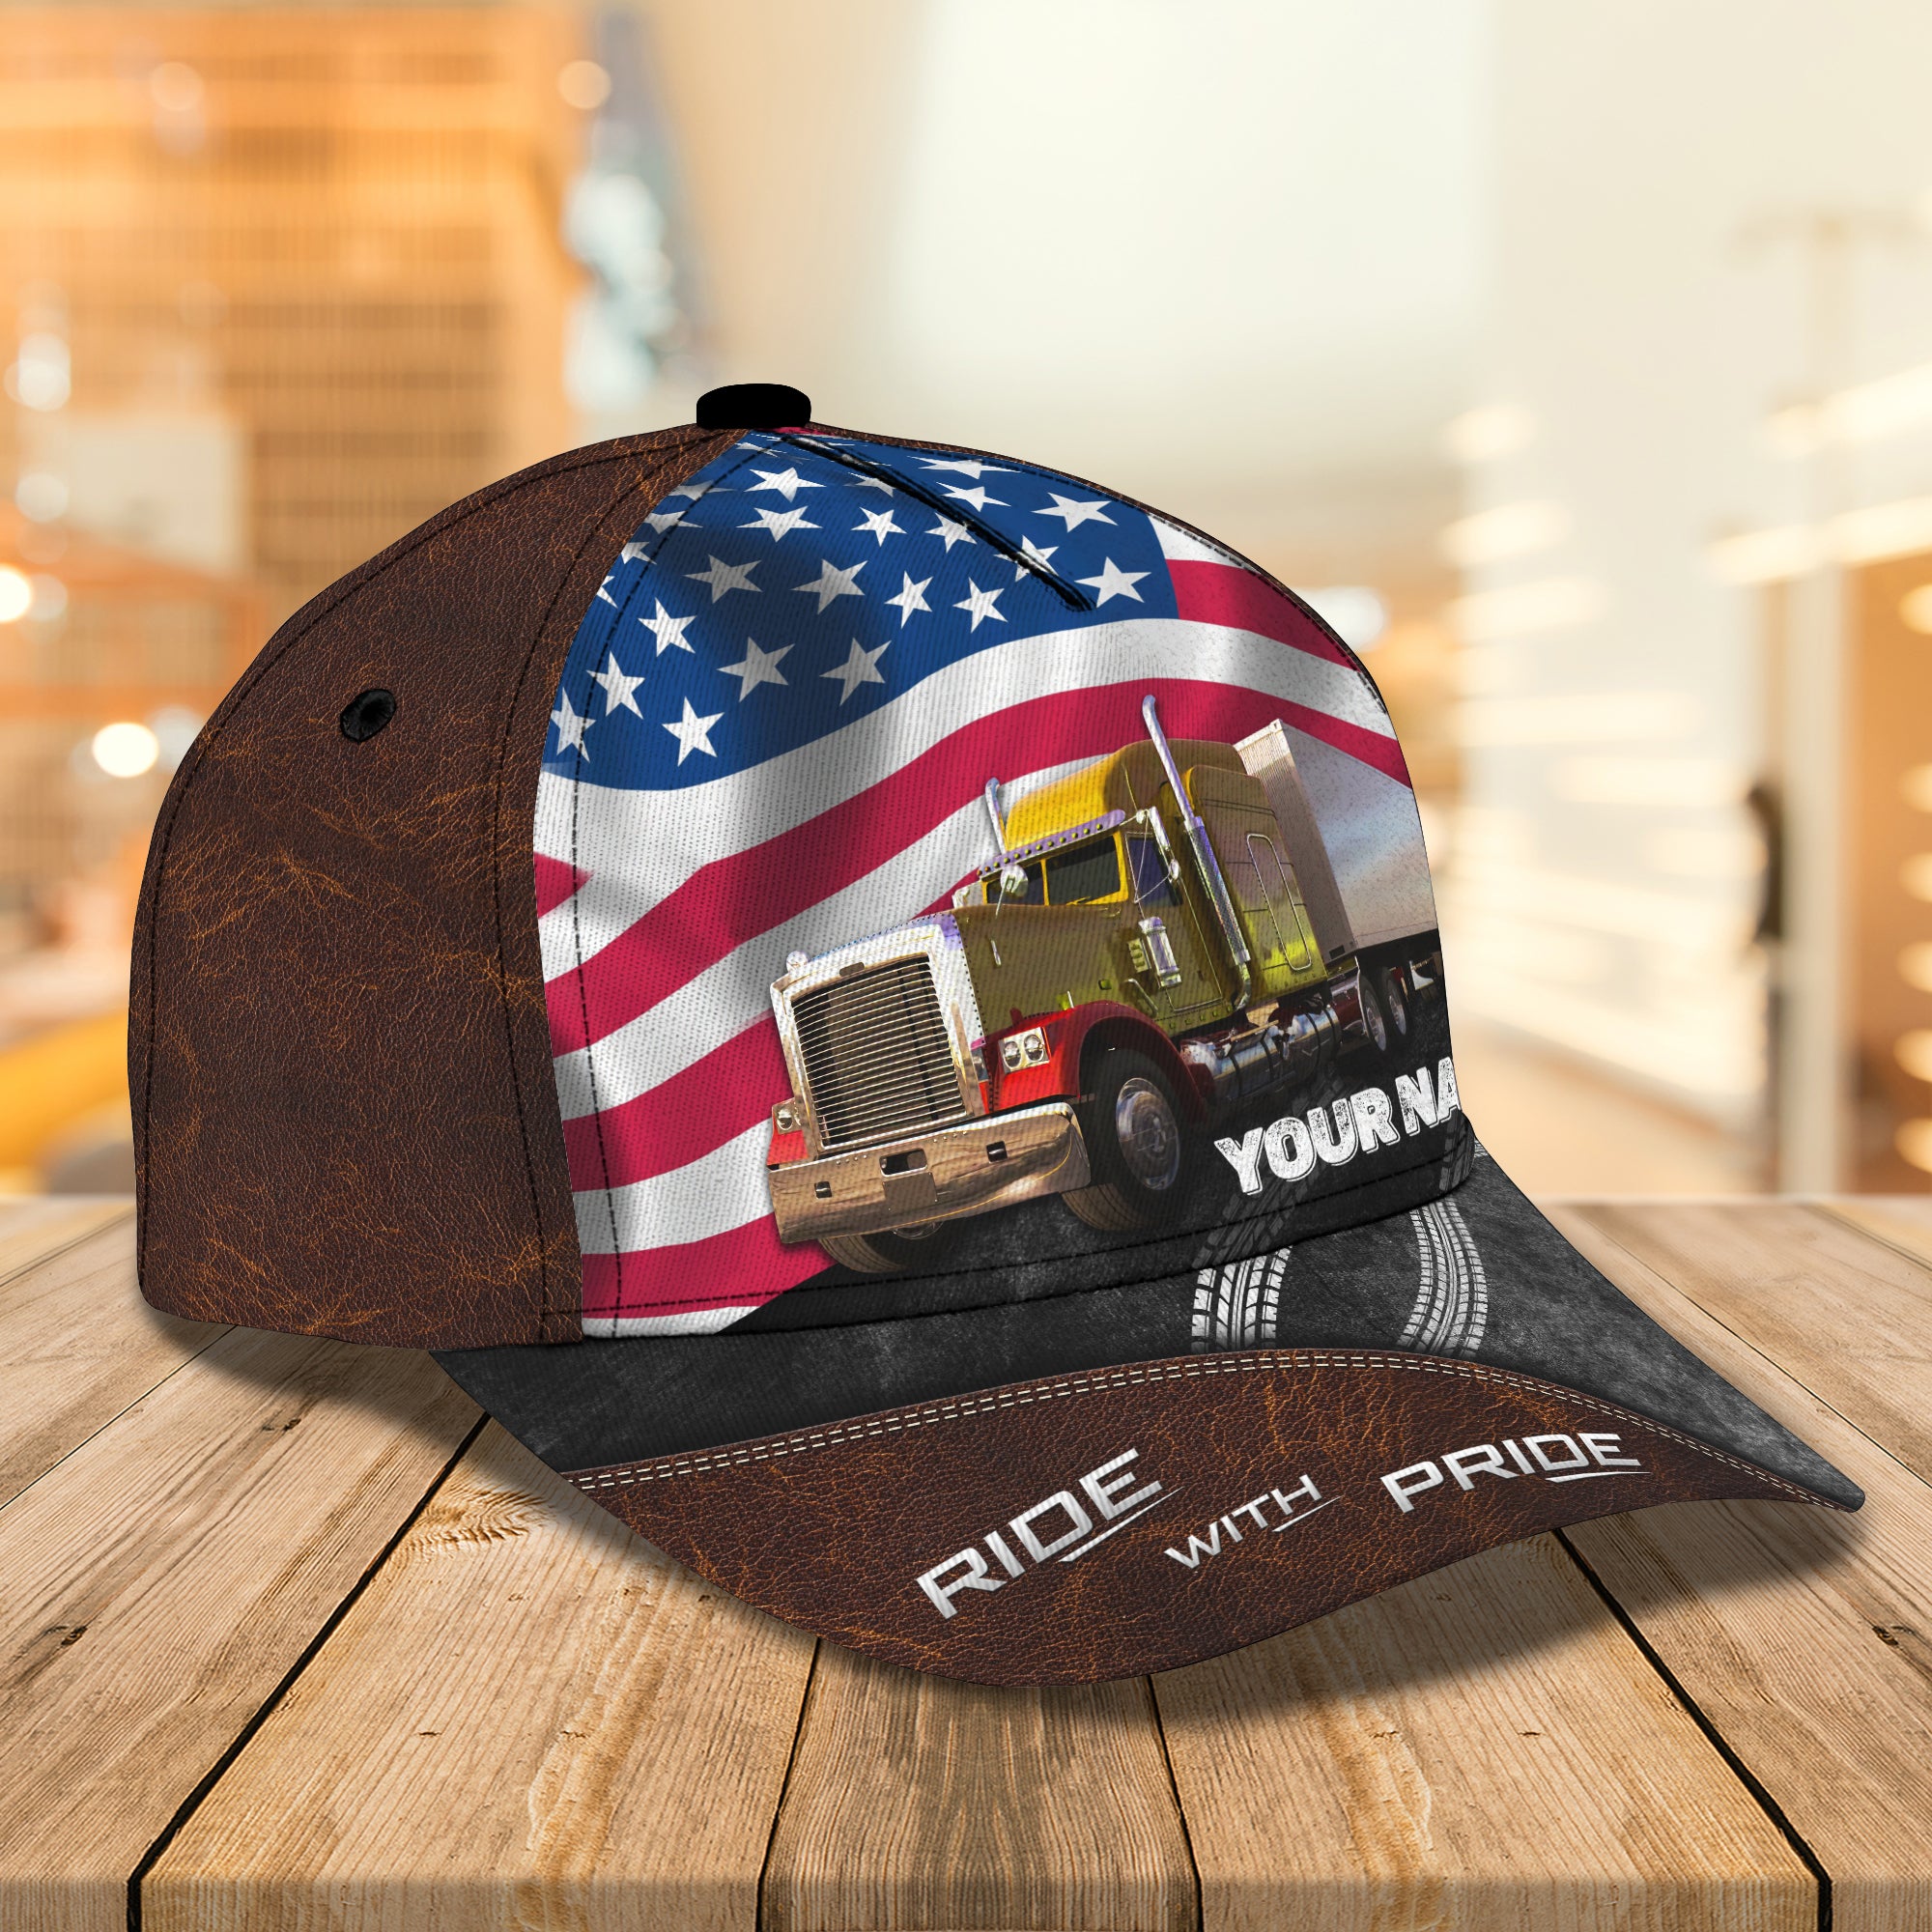 Trucker- Ride With Pride - Personalized Name Cap - QA99